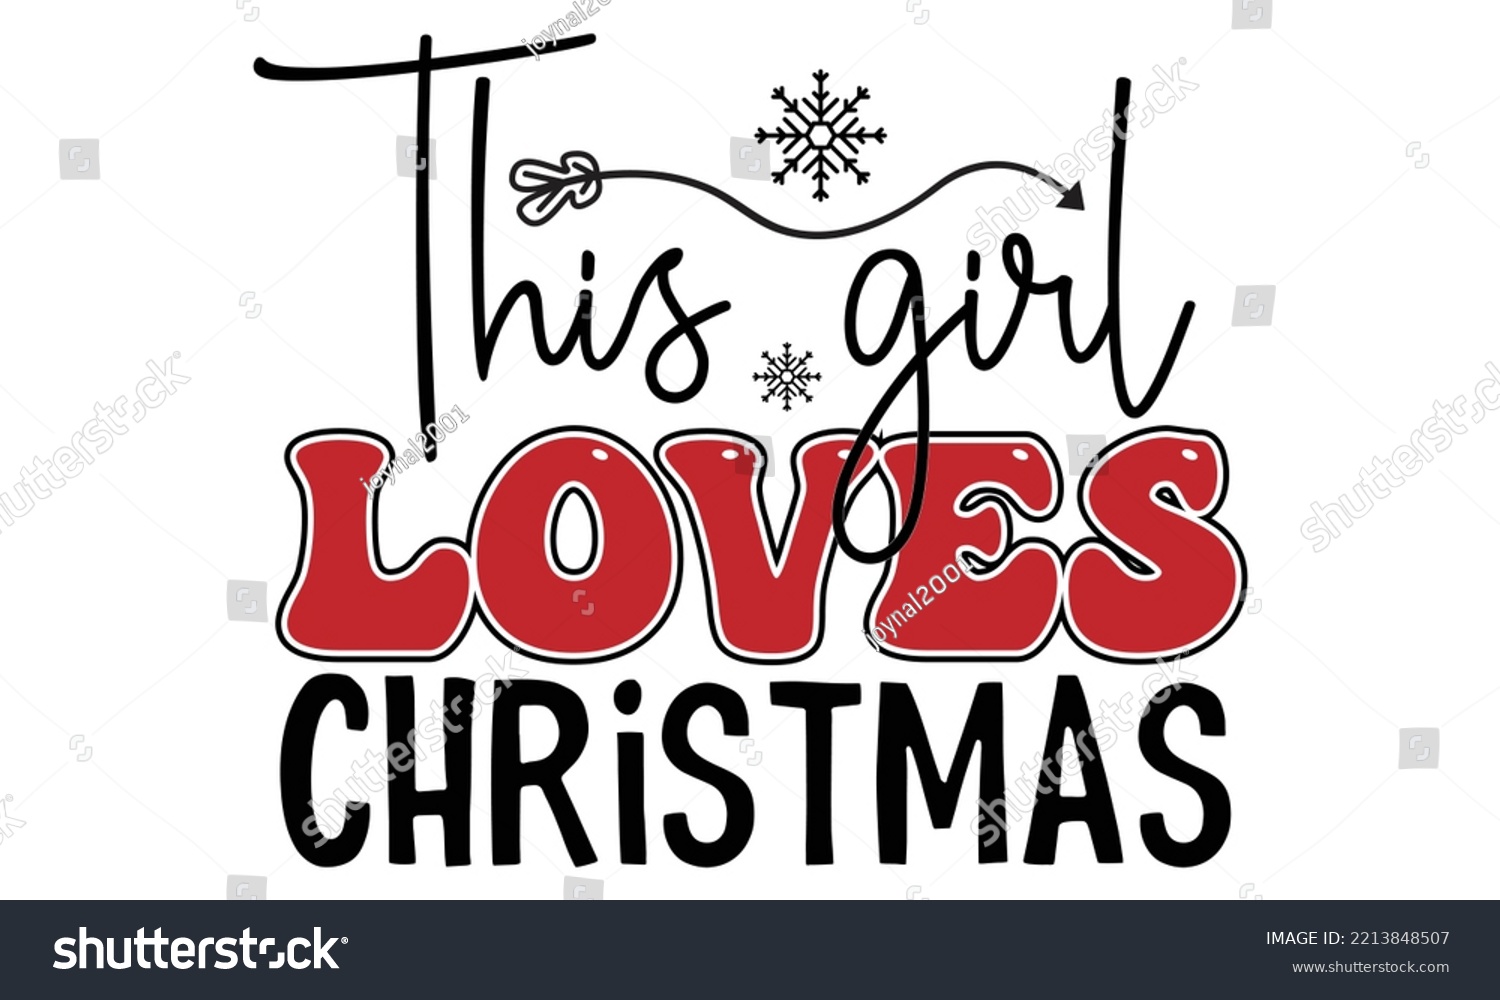 SVG of Christmas Coffee Sublimation Quotes SVG Cut Files Designs. Breast Cancer Stickers quotes SVG cut files, Christmas Coffee Stickers quotes t shirt designs, Saying about Christmas Coffee Stickers . svg